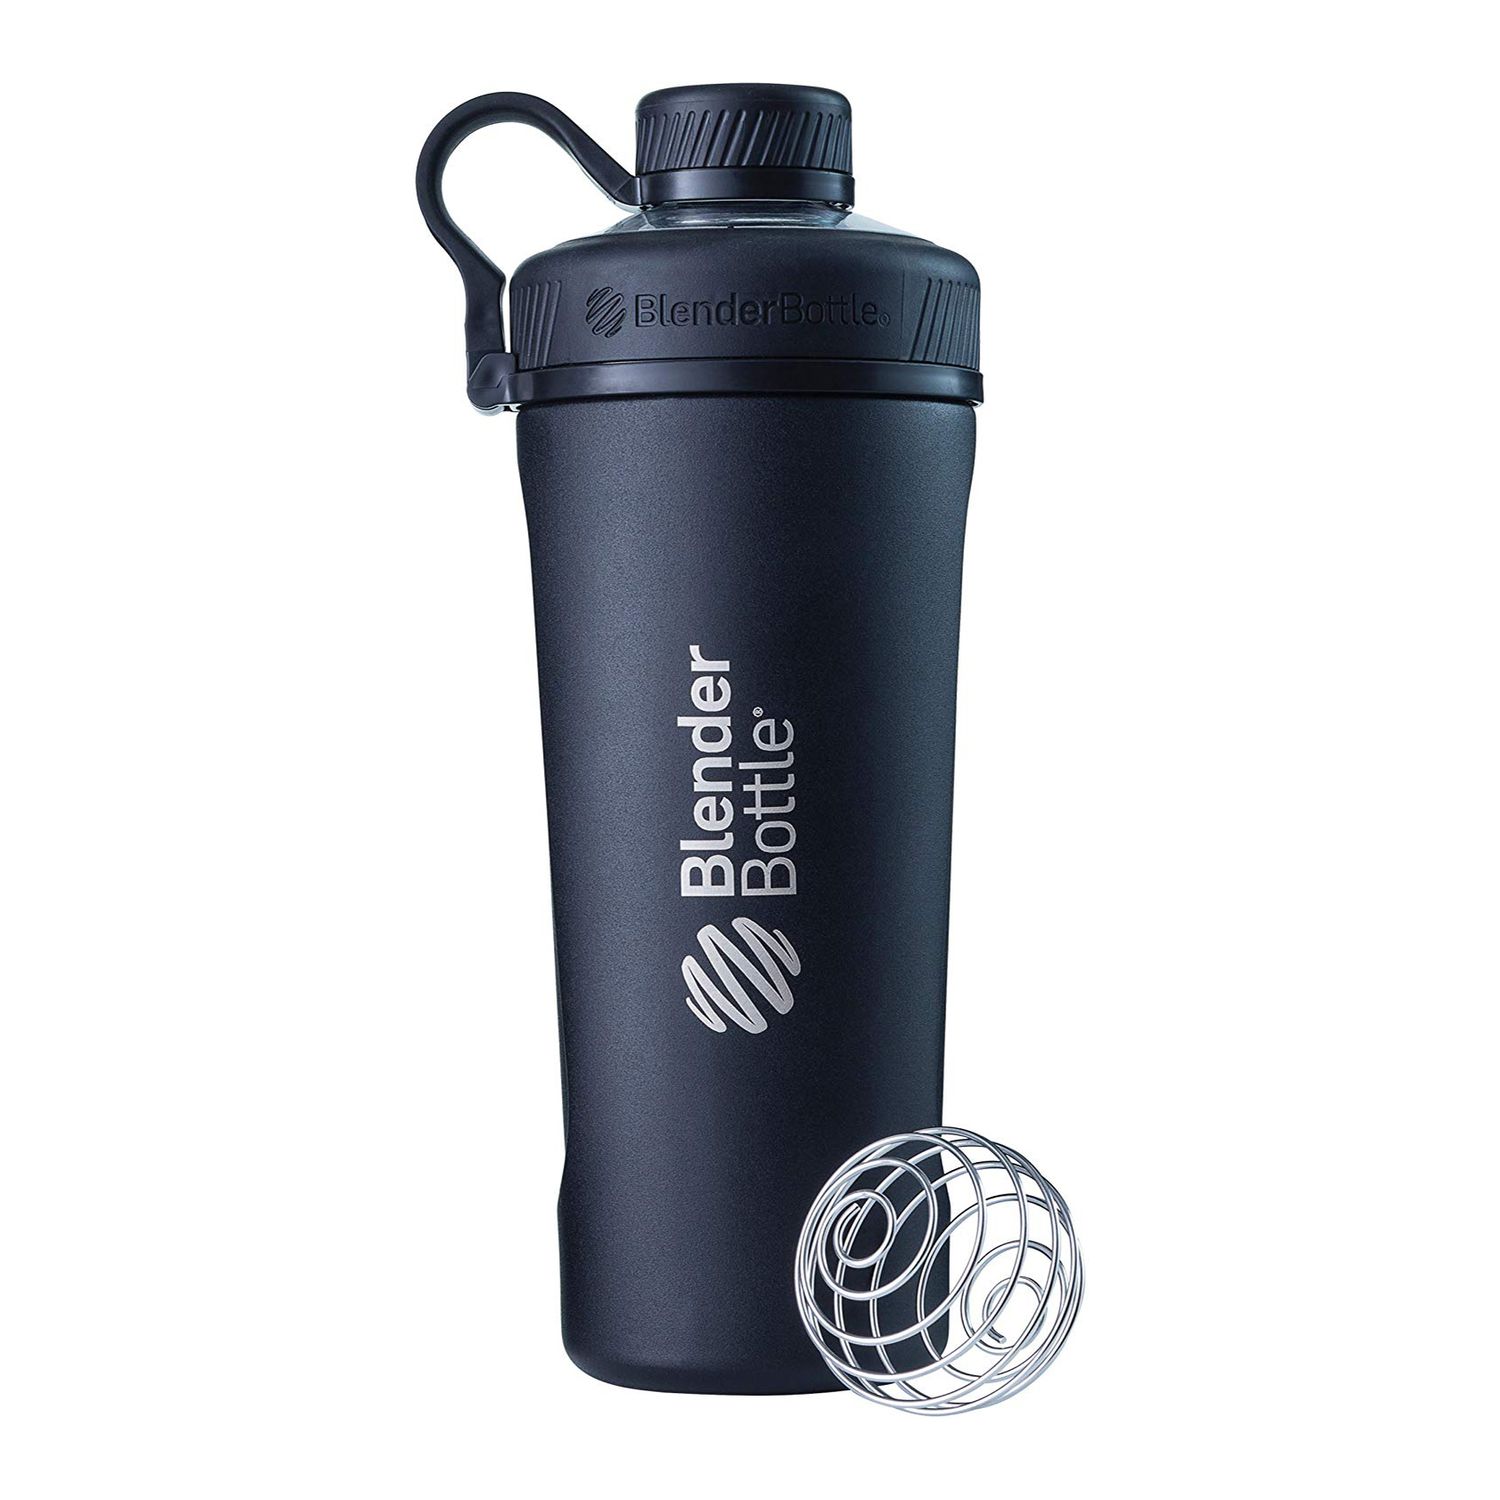 Maiges Lee Classic Loop Top Shaker Bottle,400ML with Mixer Wire Whisk Balls Protein Shaker Cups,Multi-Function water bottle for sports /& outdoor, Black